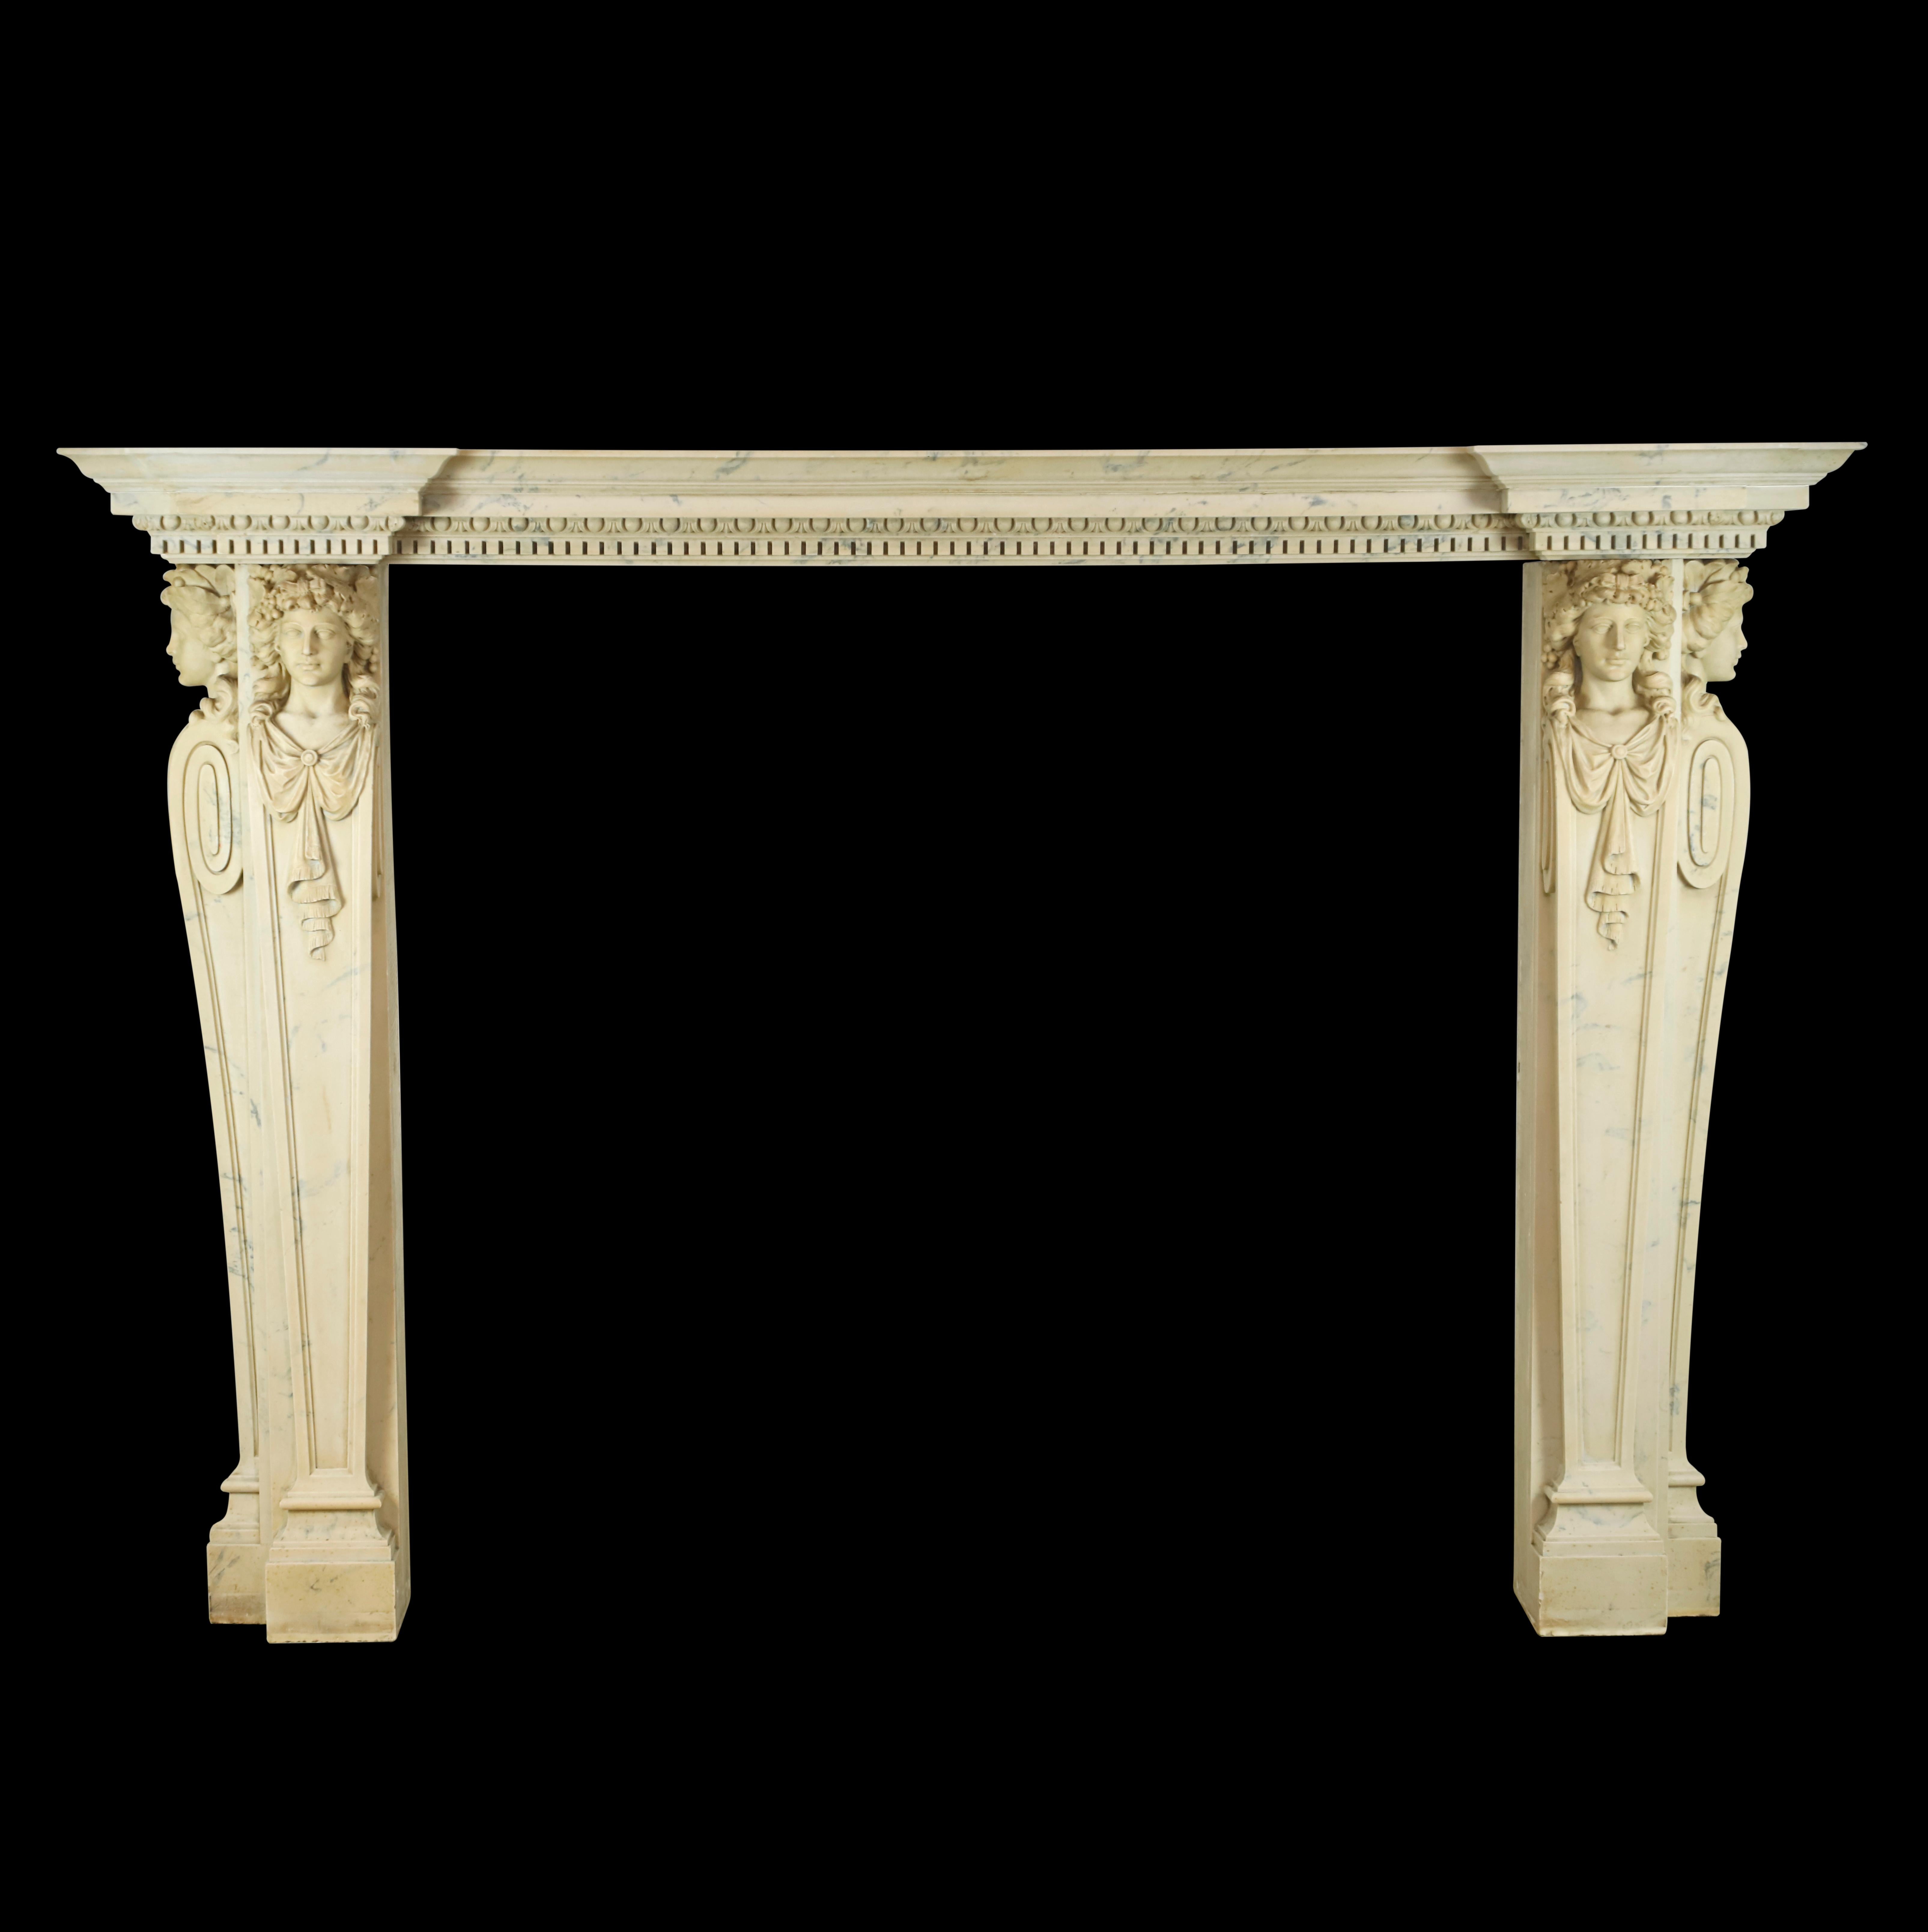 Heritage Marble Inc. Cast Resin Fiberglass Figures Mantel In Good Condition In New York, NY